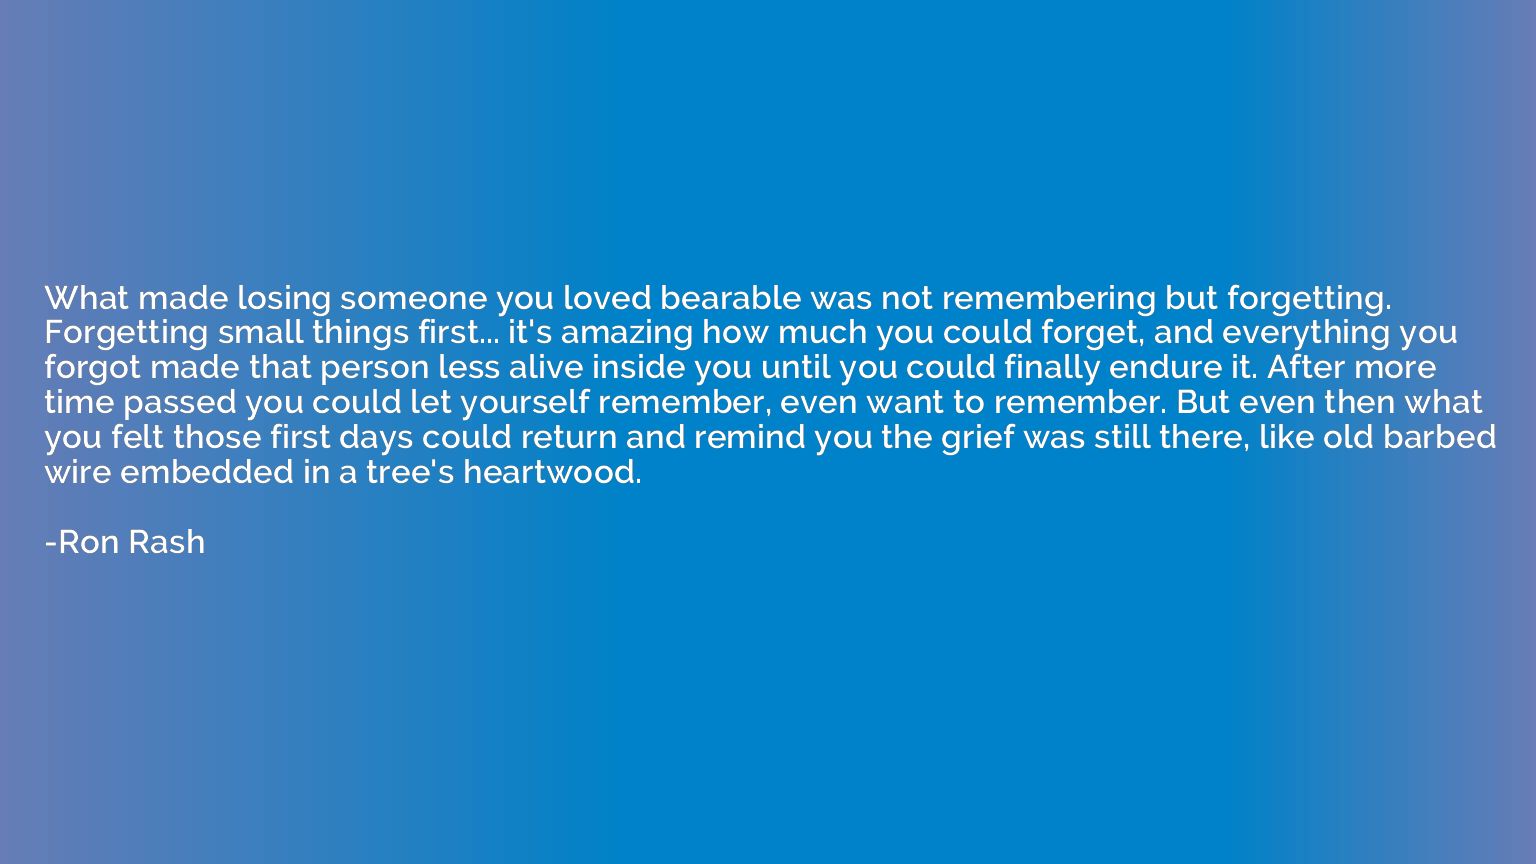 What made losing someone you loved bearable was not remember